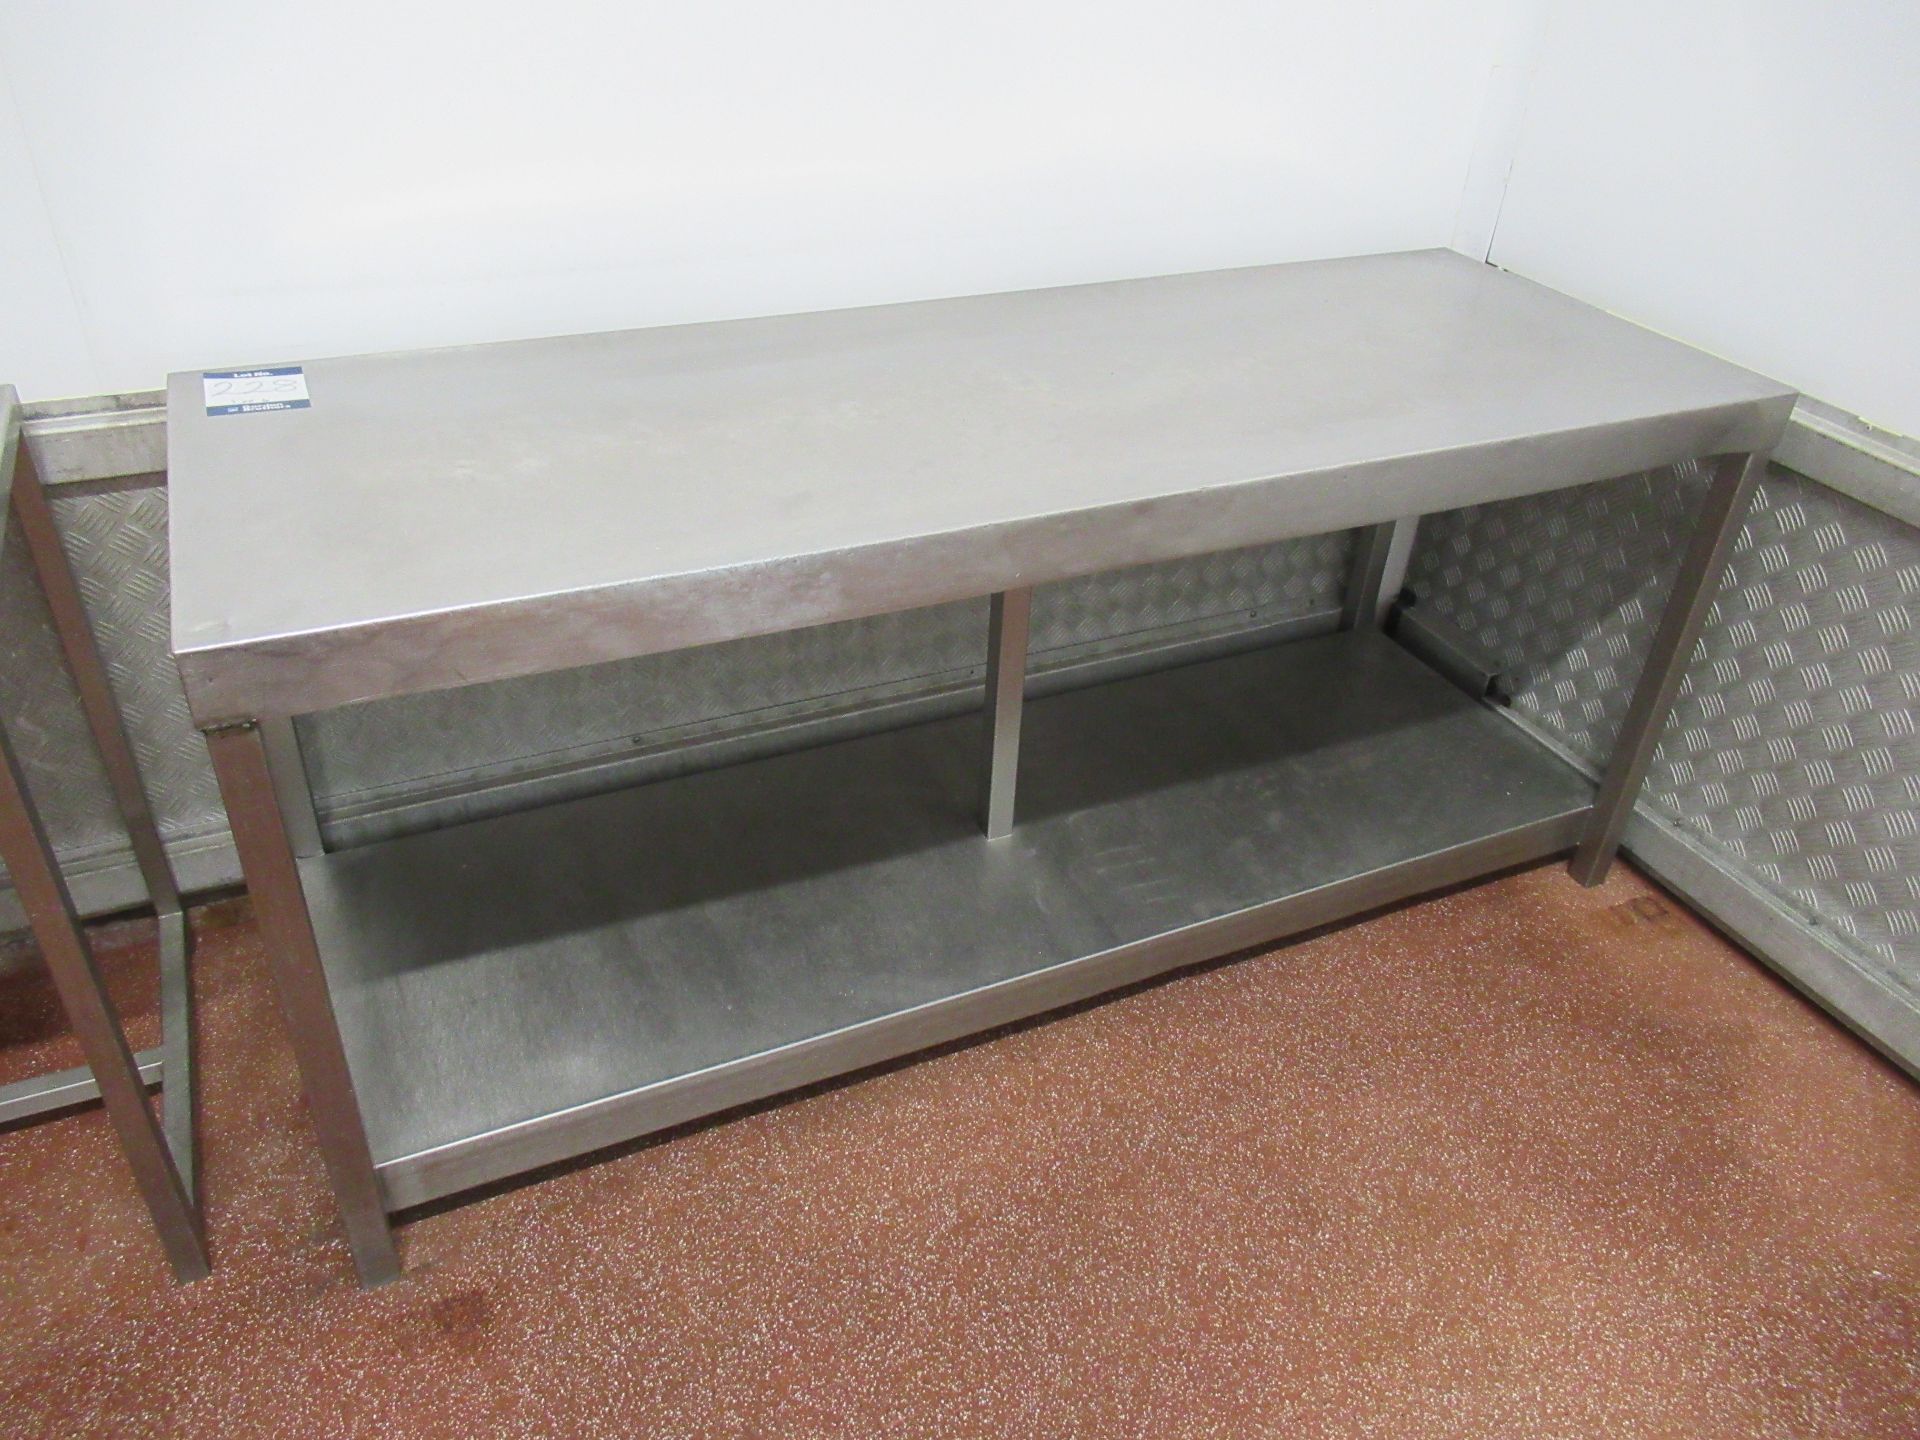 4 Stainless steel tables, one with 1800 x 600mm work surface and three with 1800 x 650mm work